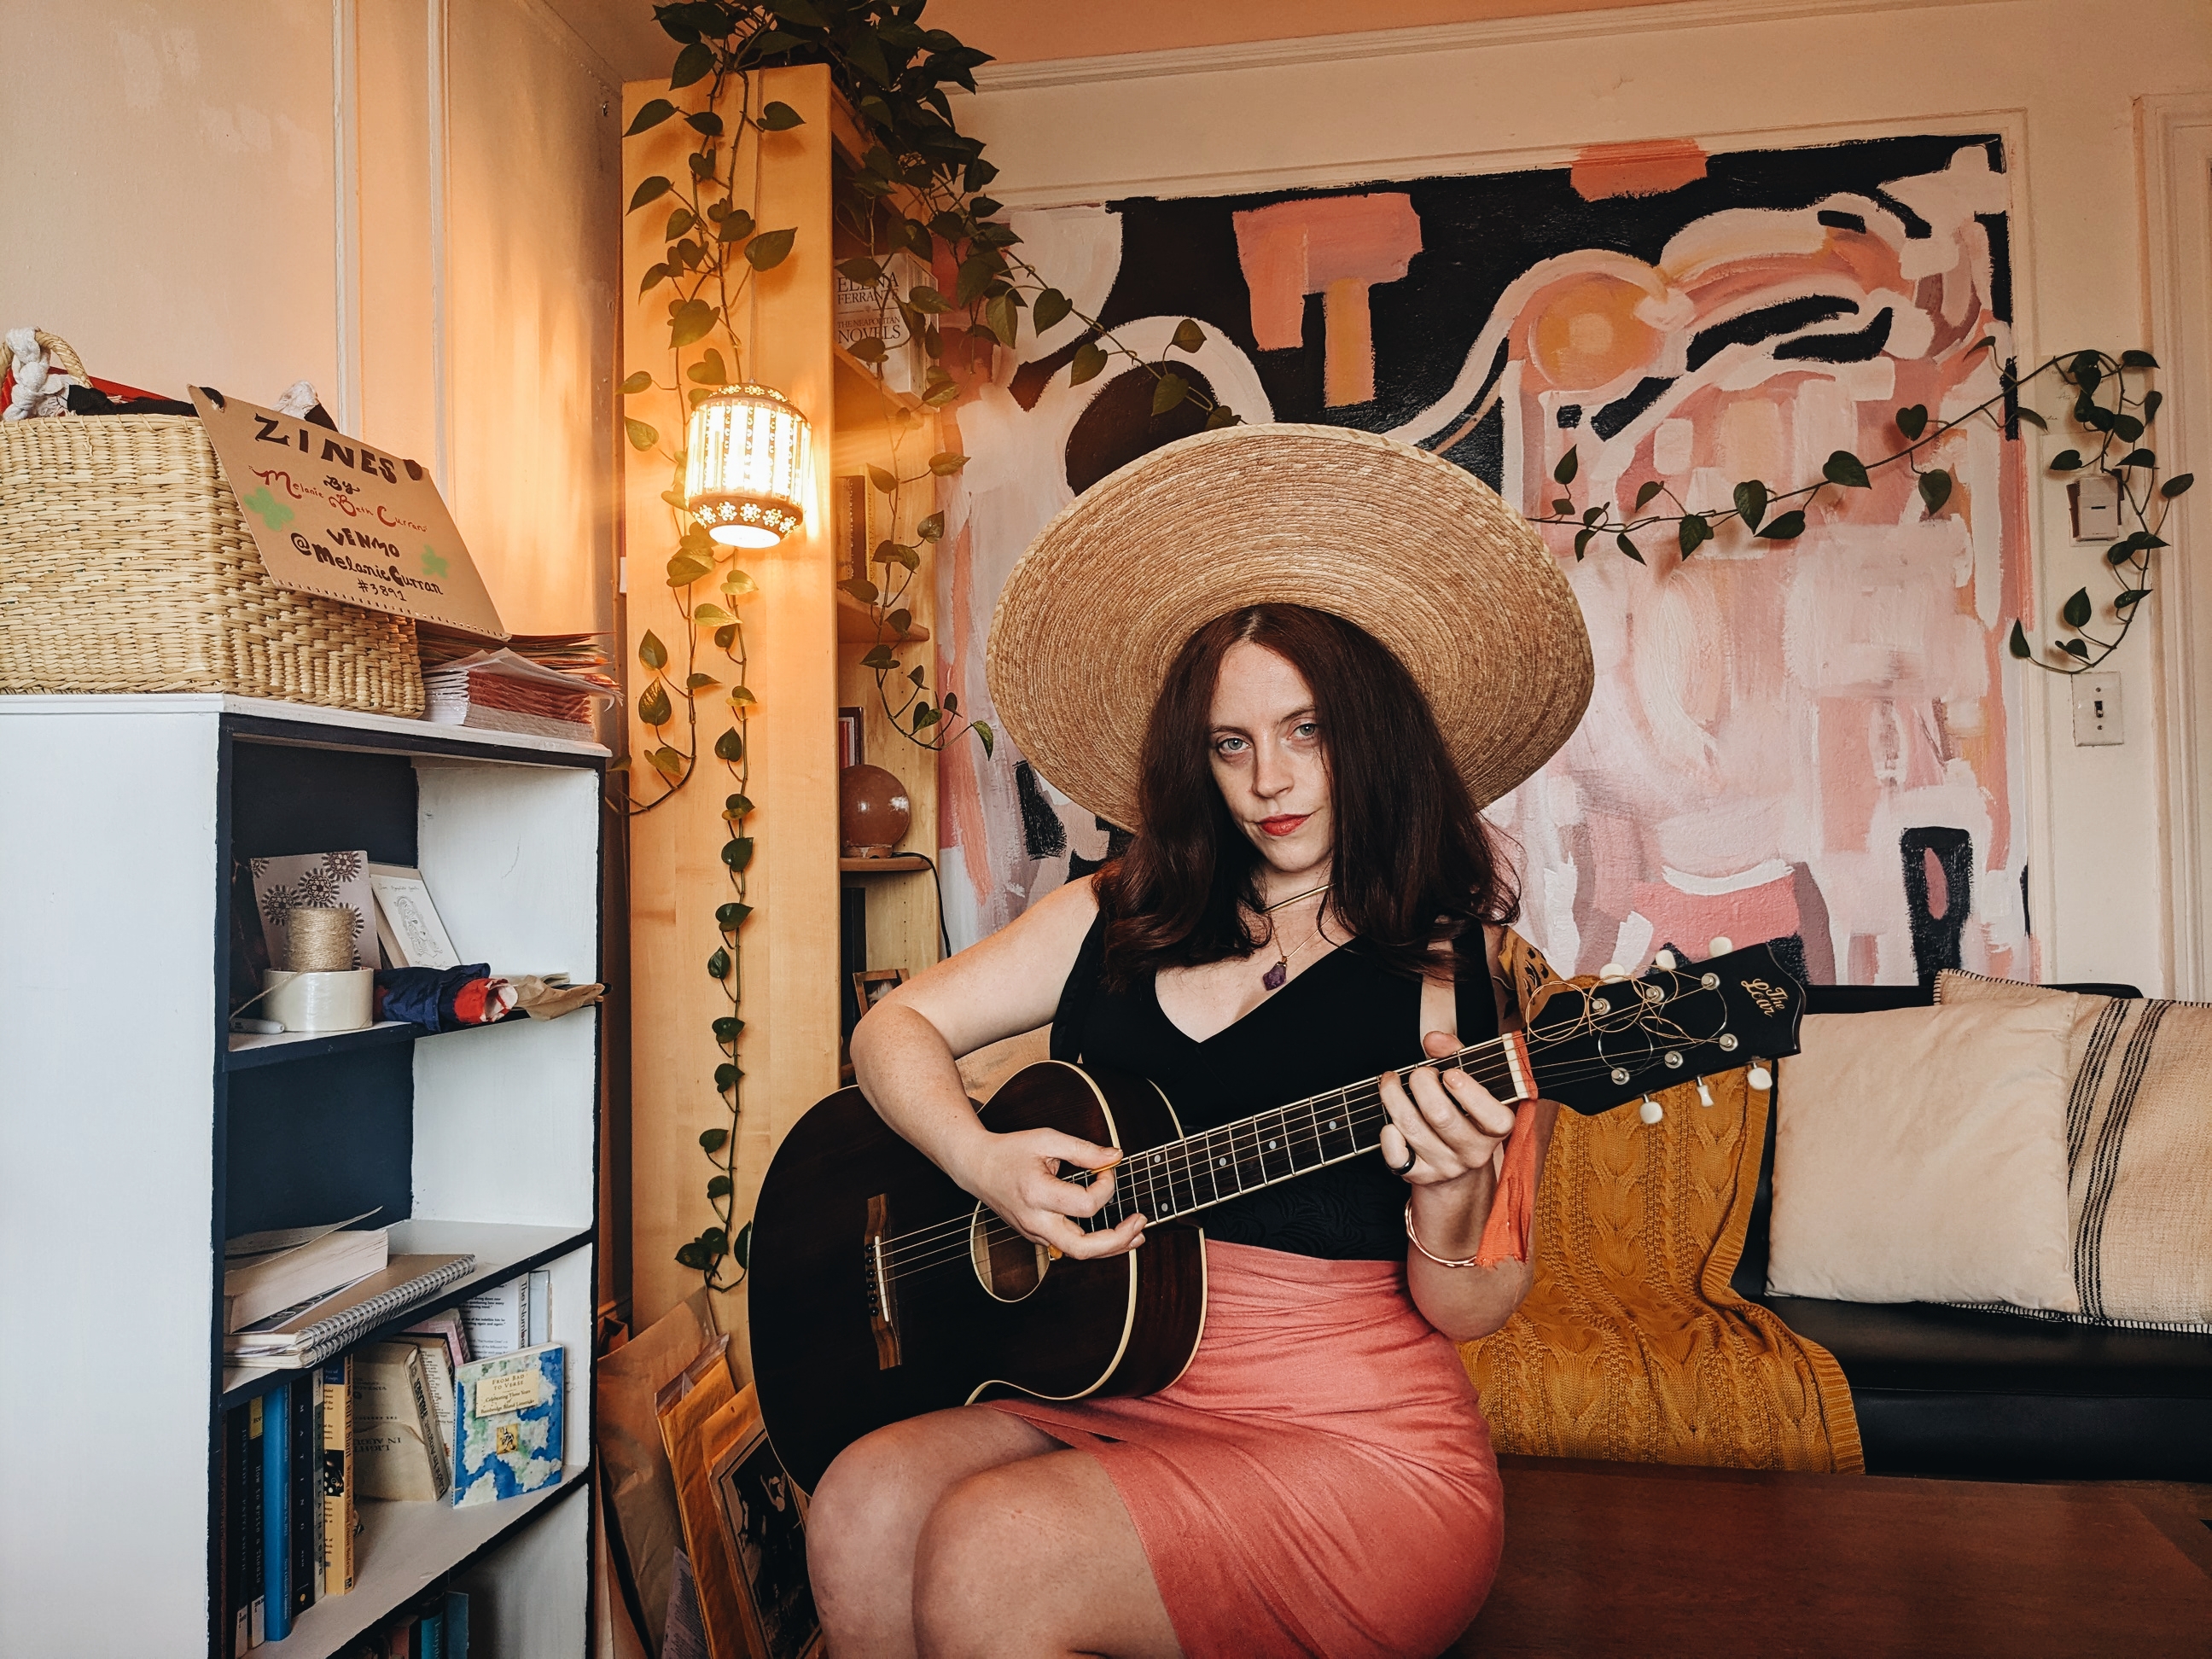 Melanie Beth Curran wears a large straw hat and plays a parlor guitar in her scriptorium, she has auburn hair and green eyes